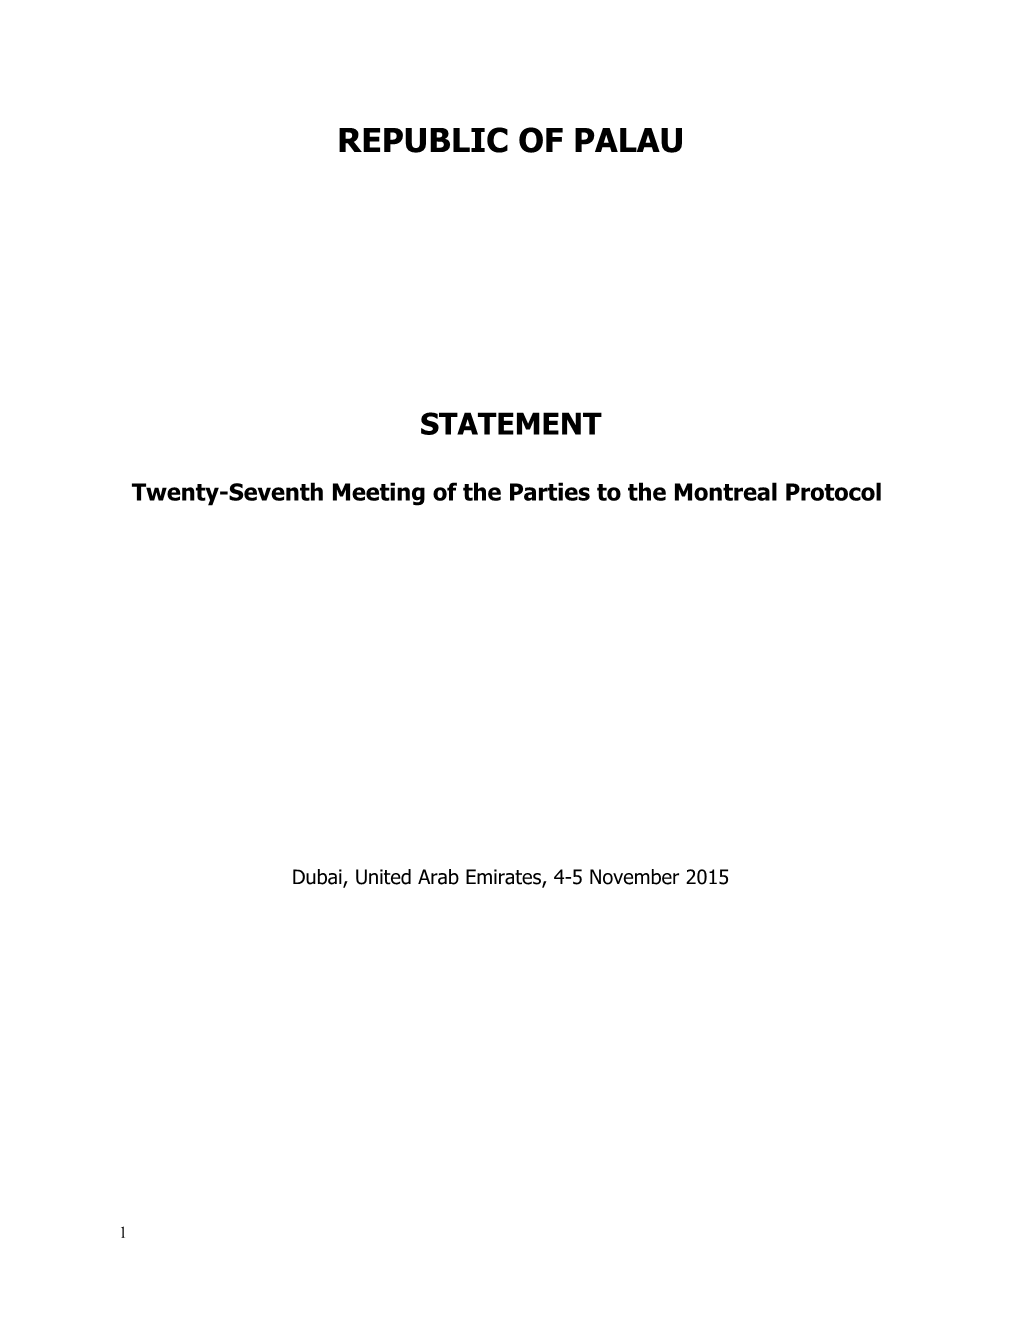 Twenty-Seventh Meeting of the Parties to the Montreal Protocol